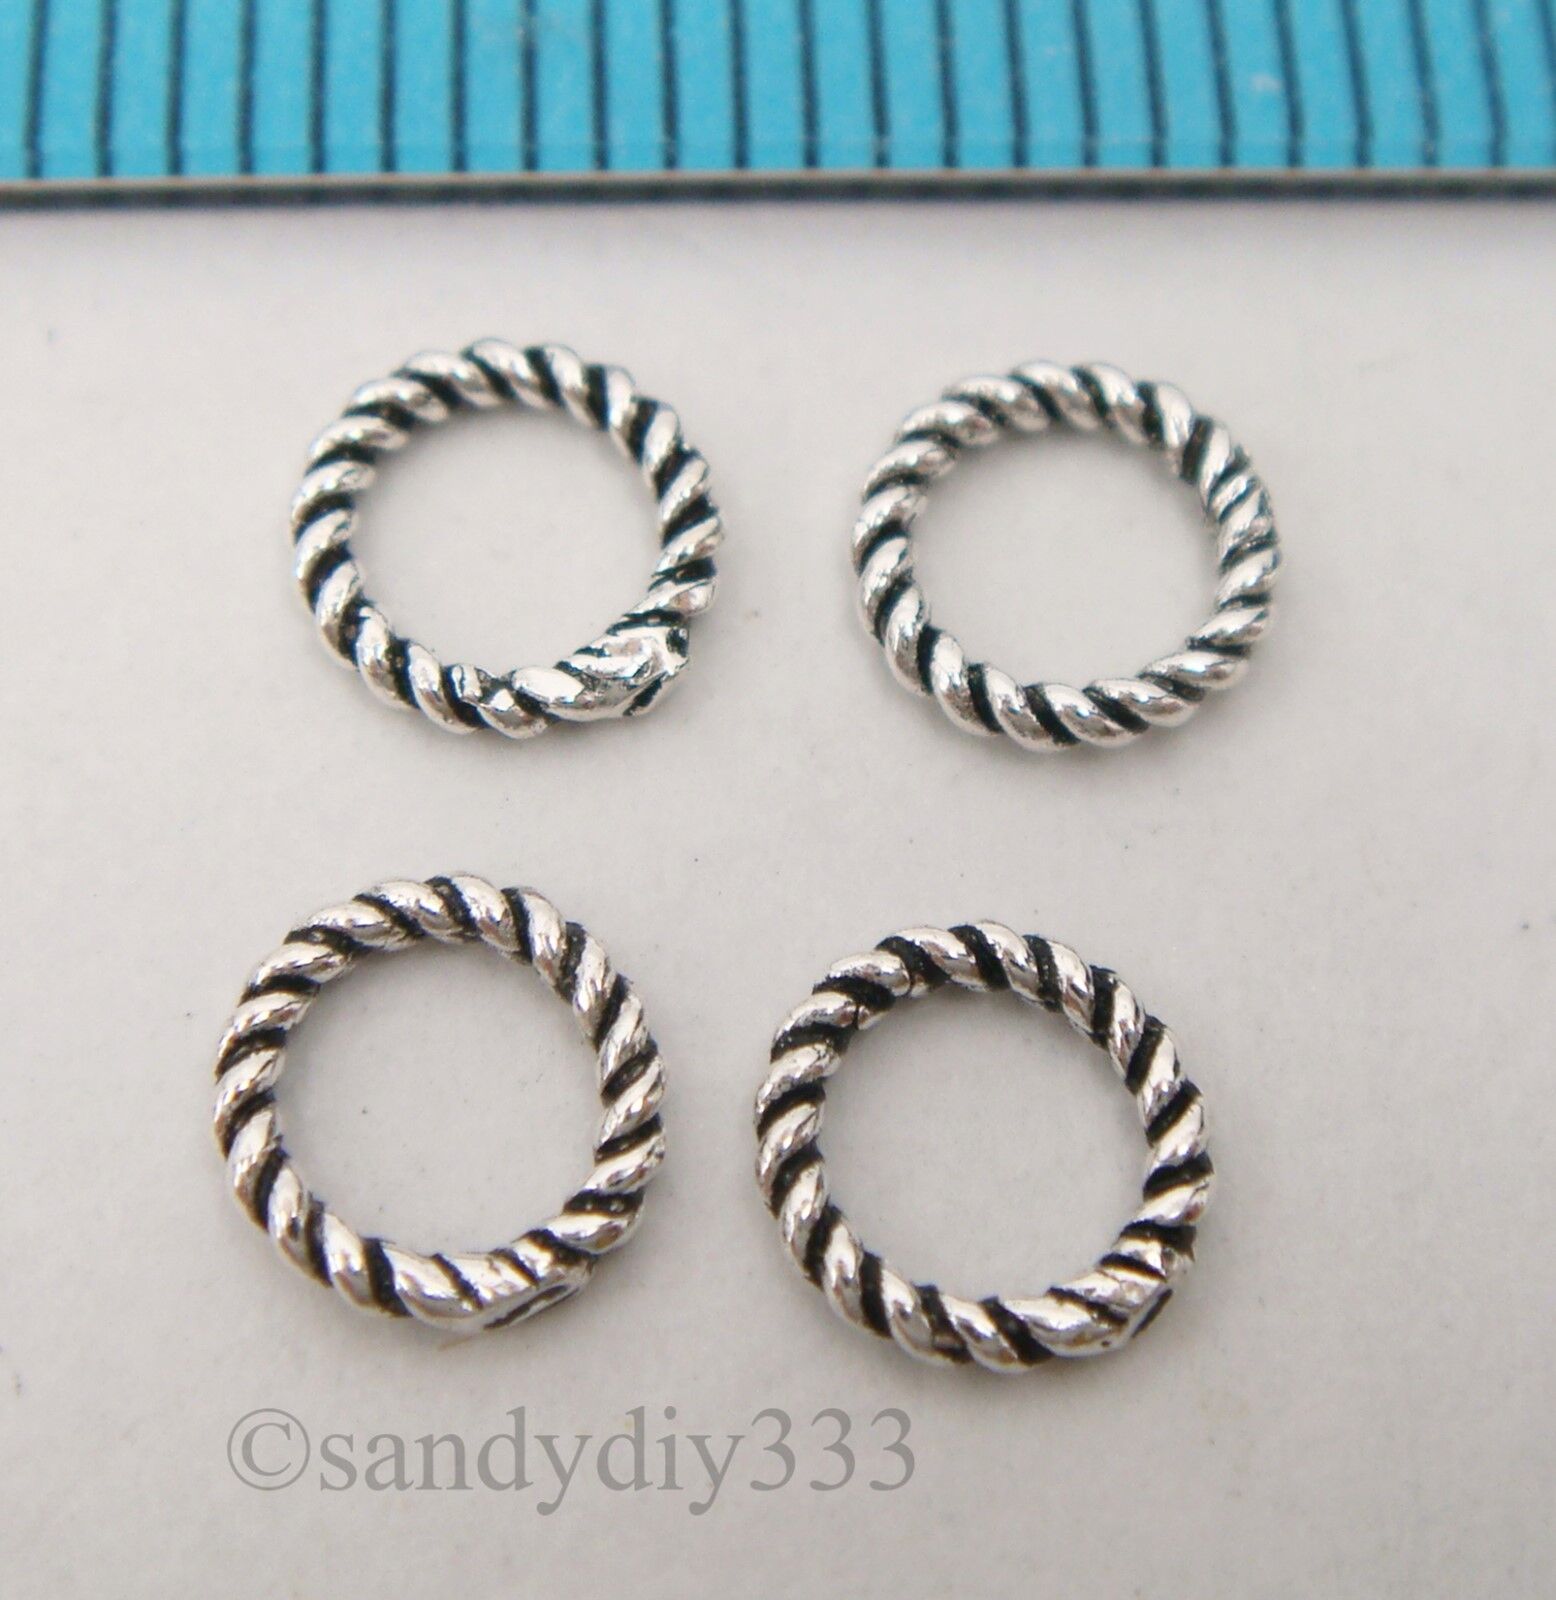 10x BALI STERLING SILVER CLOSED TWIST ROUND JUMP RING 6mm 1mm  #2554A